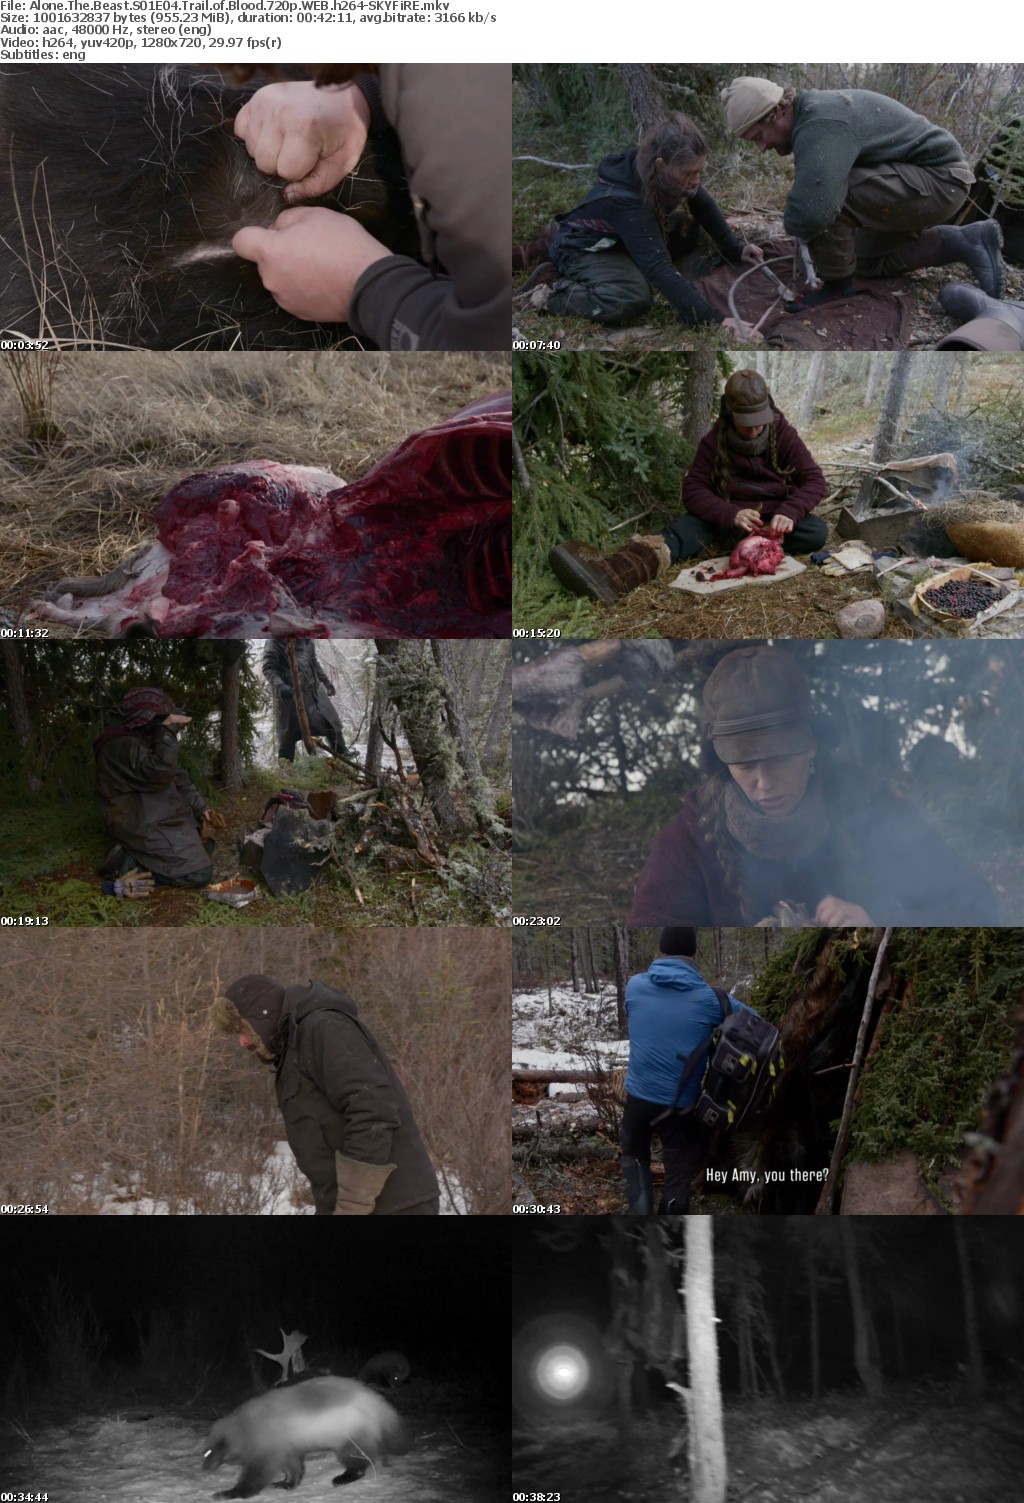 Alone The Beast S01E04 Trail of Blood 720p WEB h264-SKYFiRE